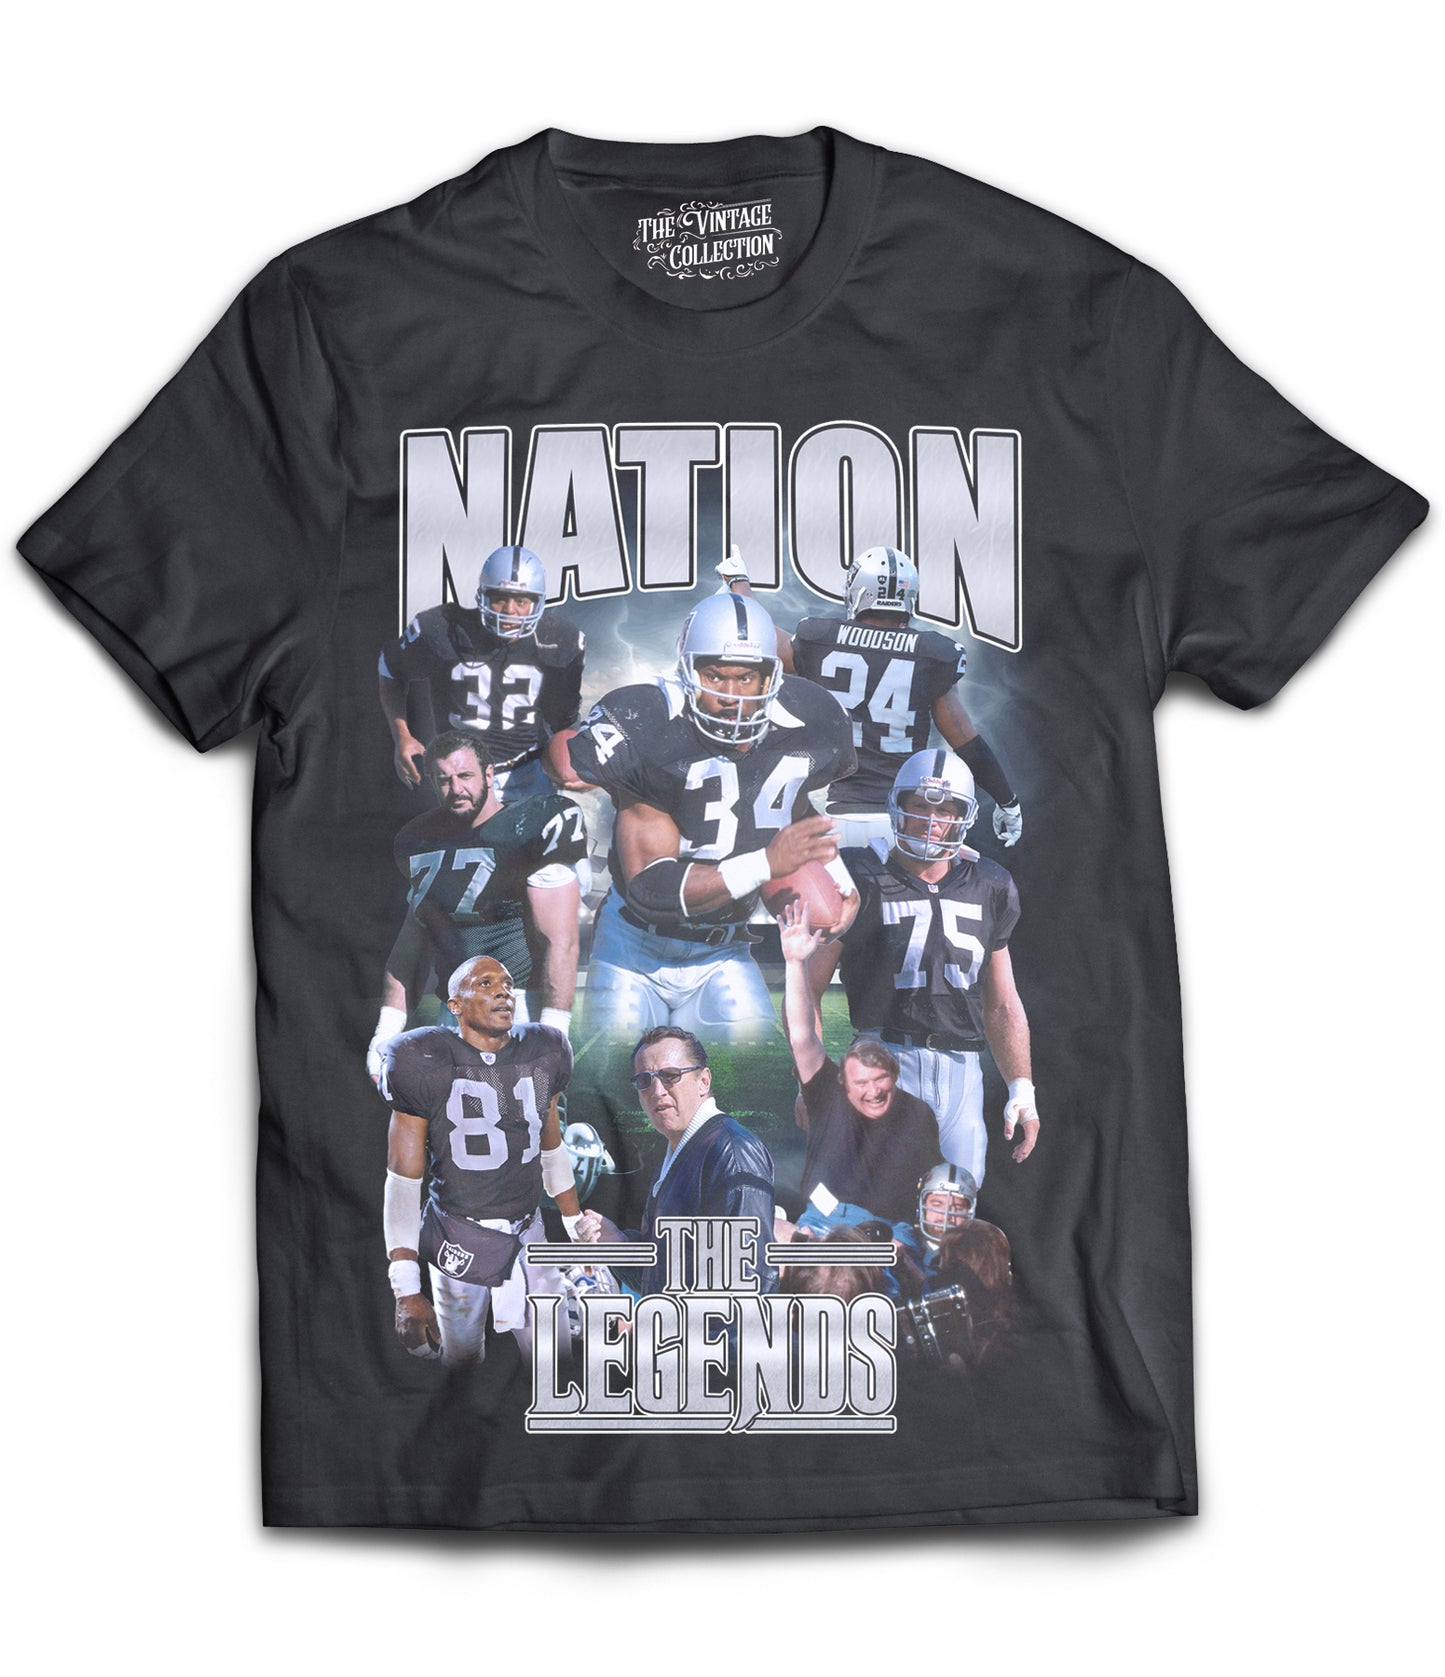 Raiders Nation "The Legends" T-Shirt